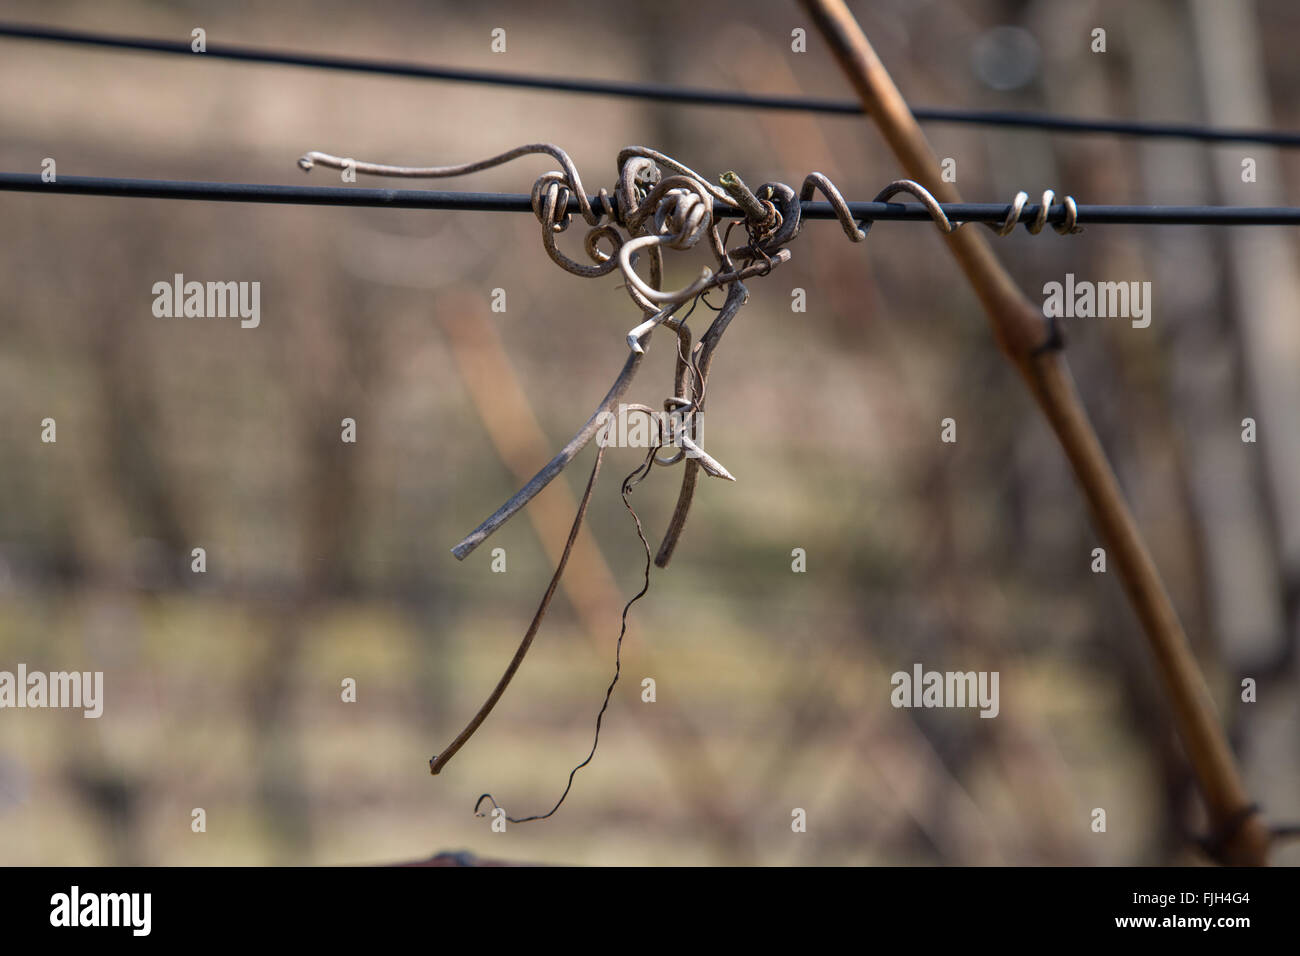 previous year's grape-vine trendrils on a wire and twig Stock Photo